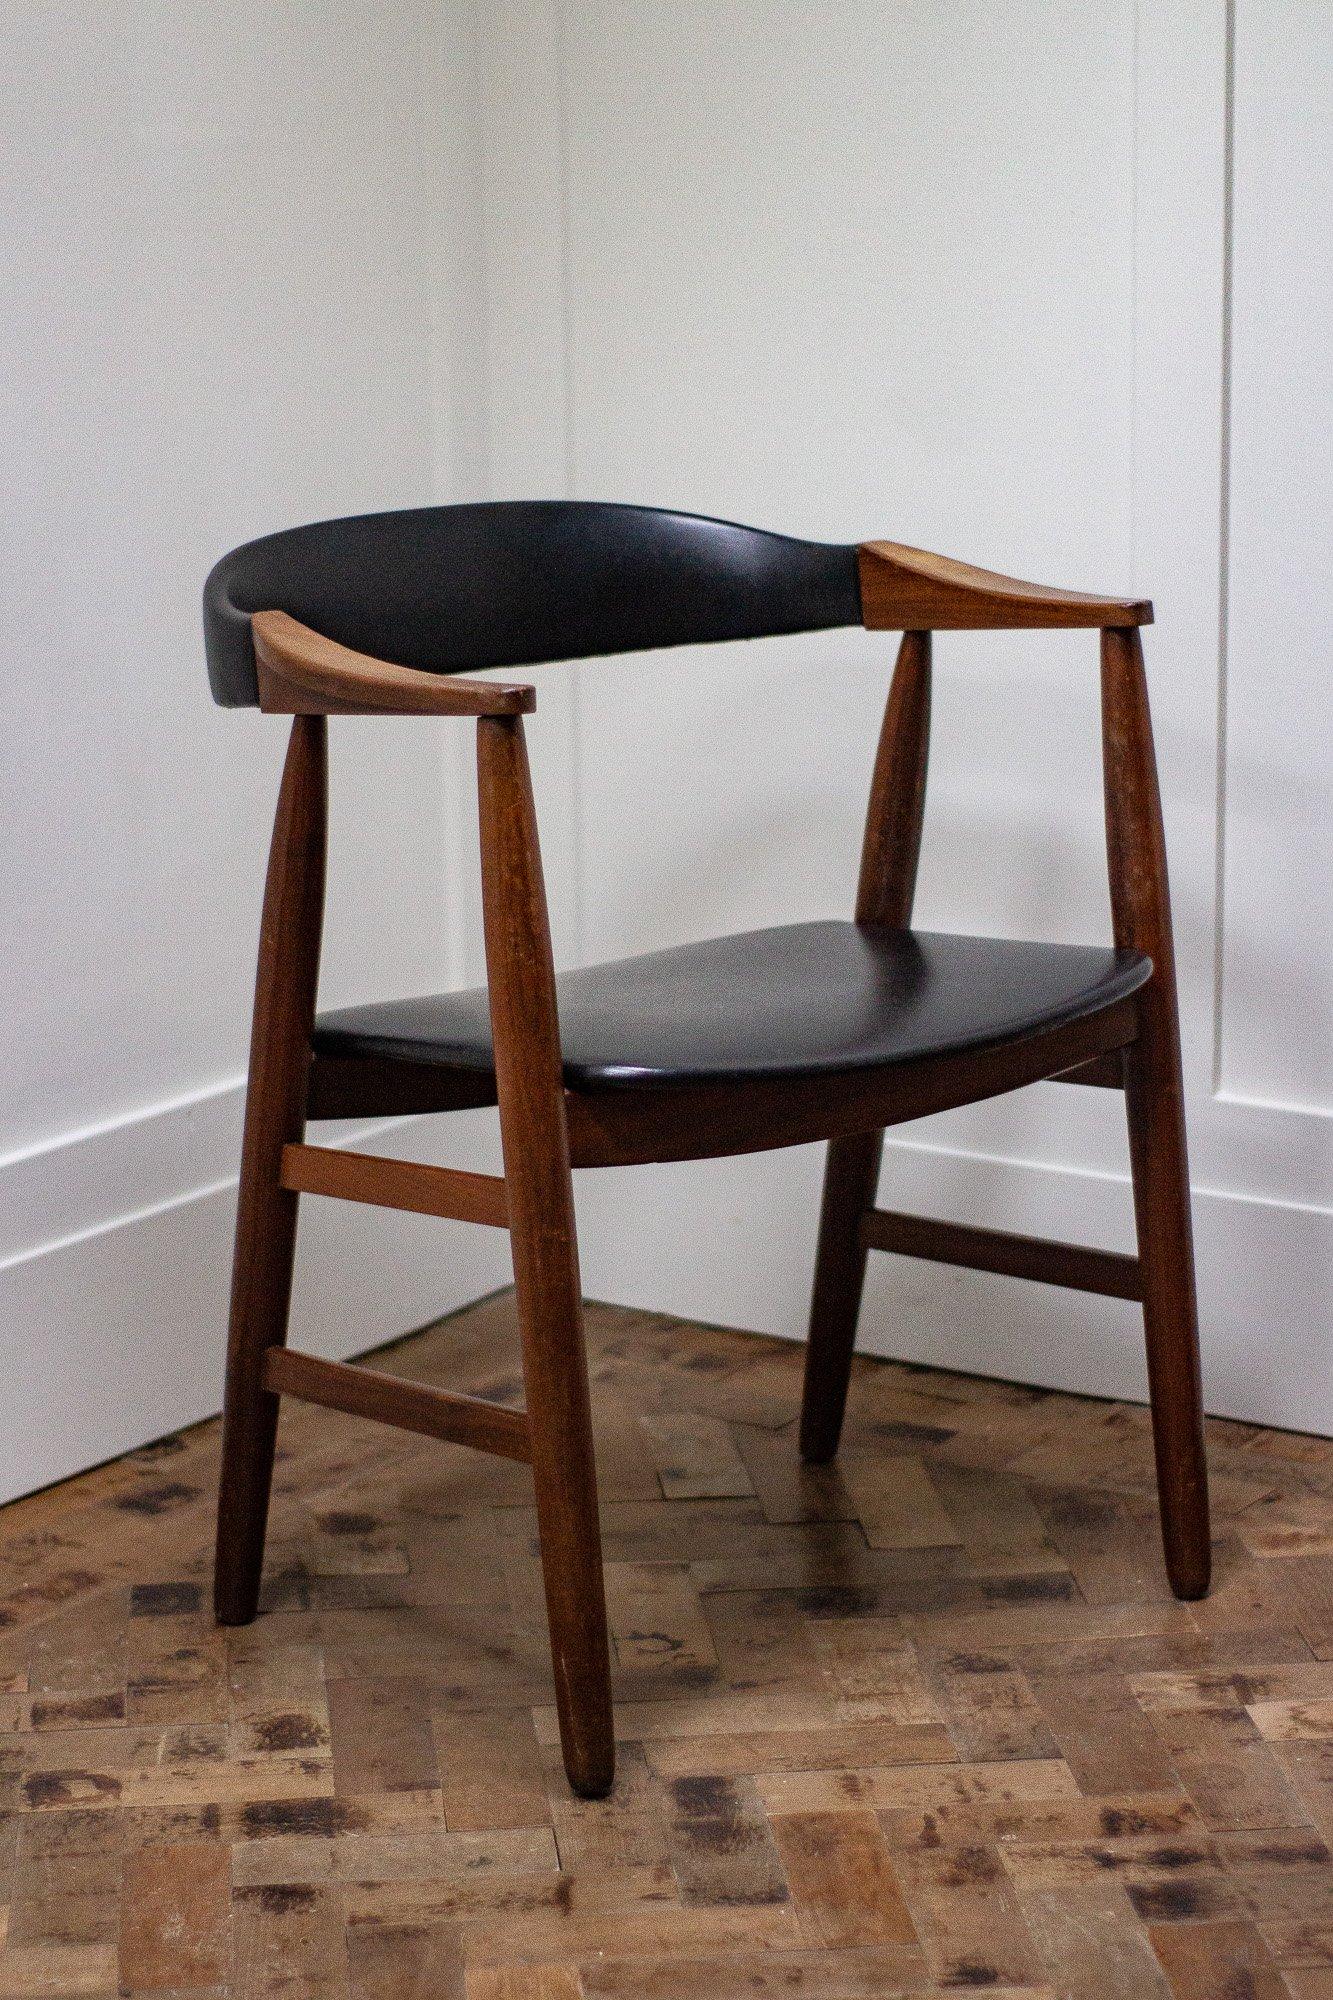 Midcentury chair made of teak with a black vinyl seat pad backrest.

Designer and maker unknown.